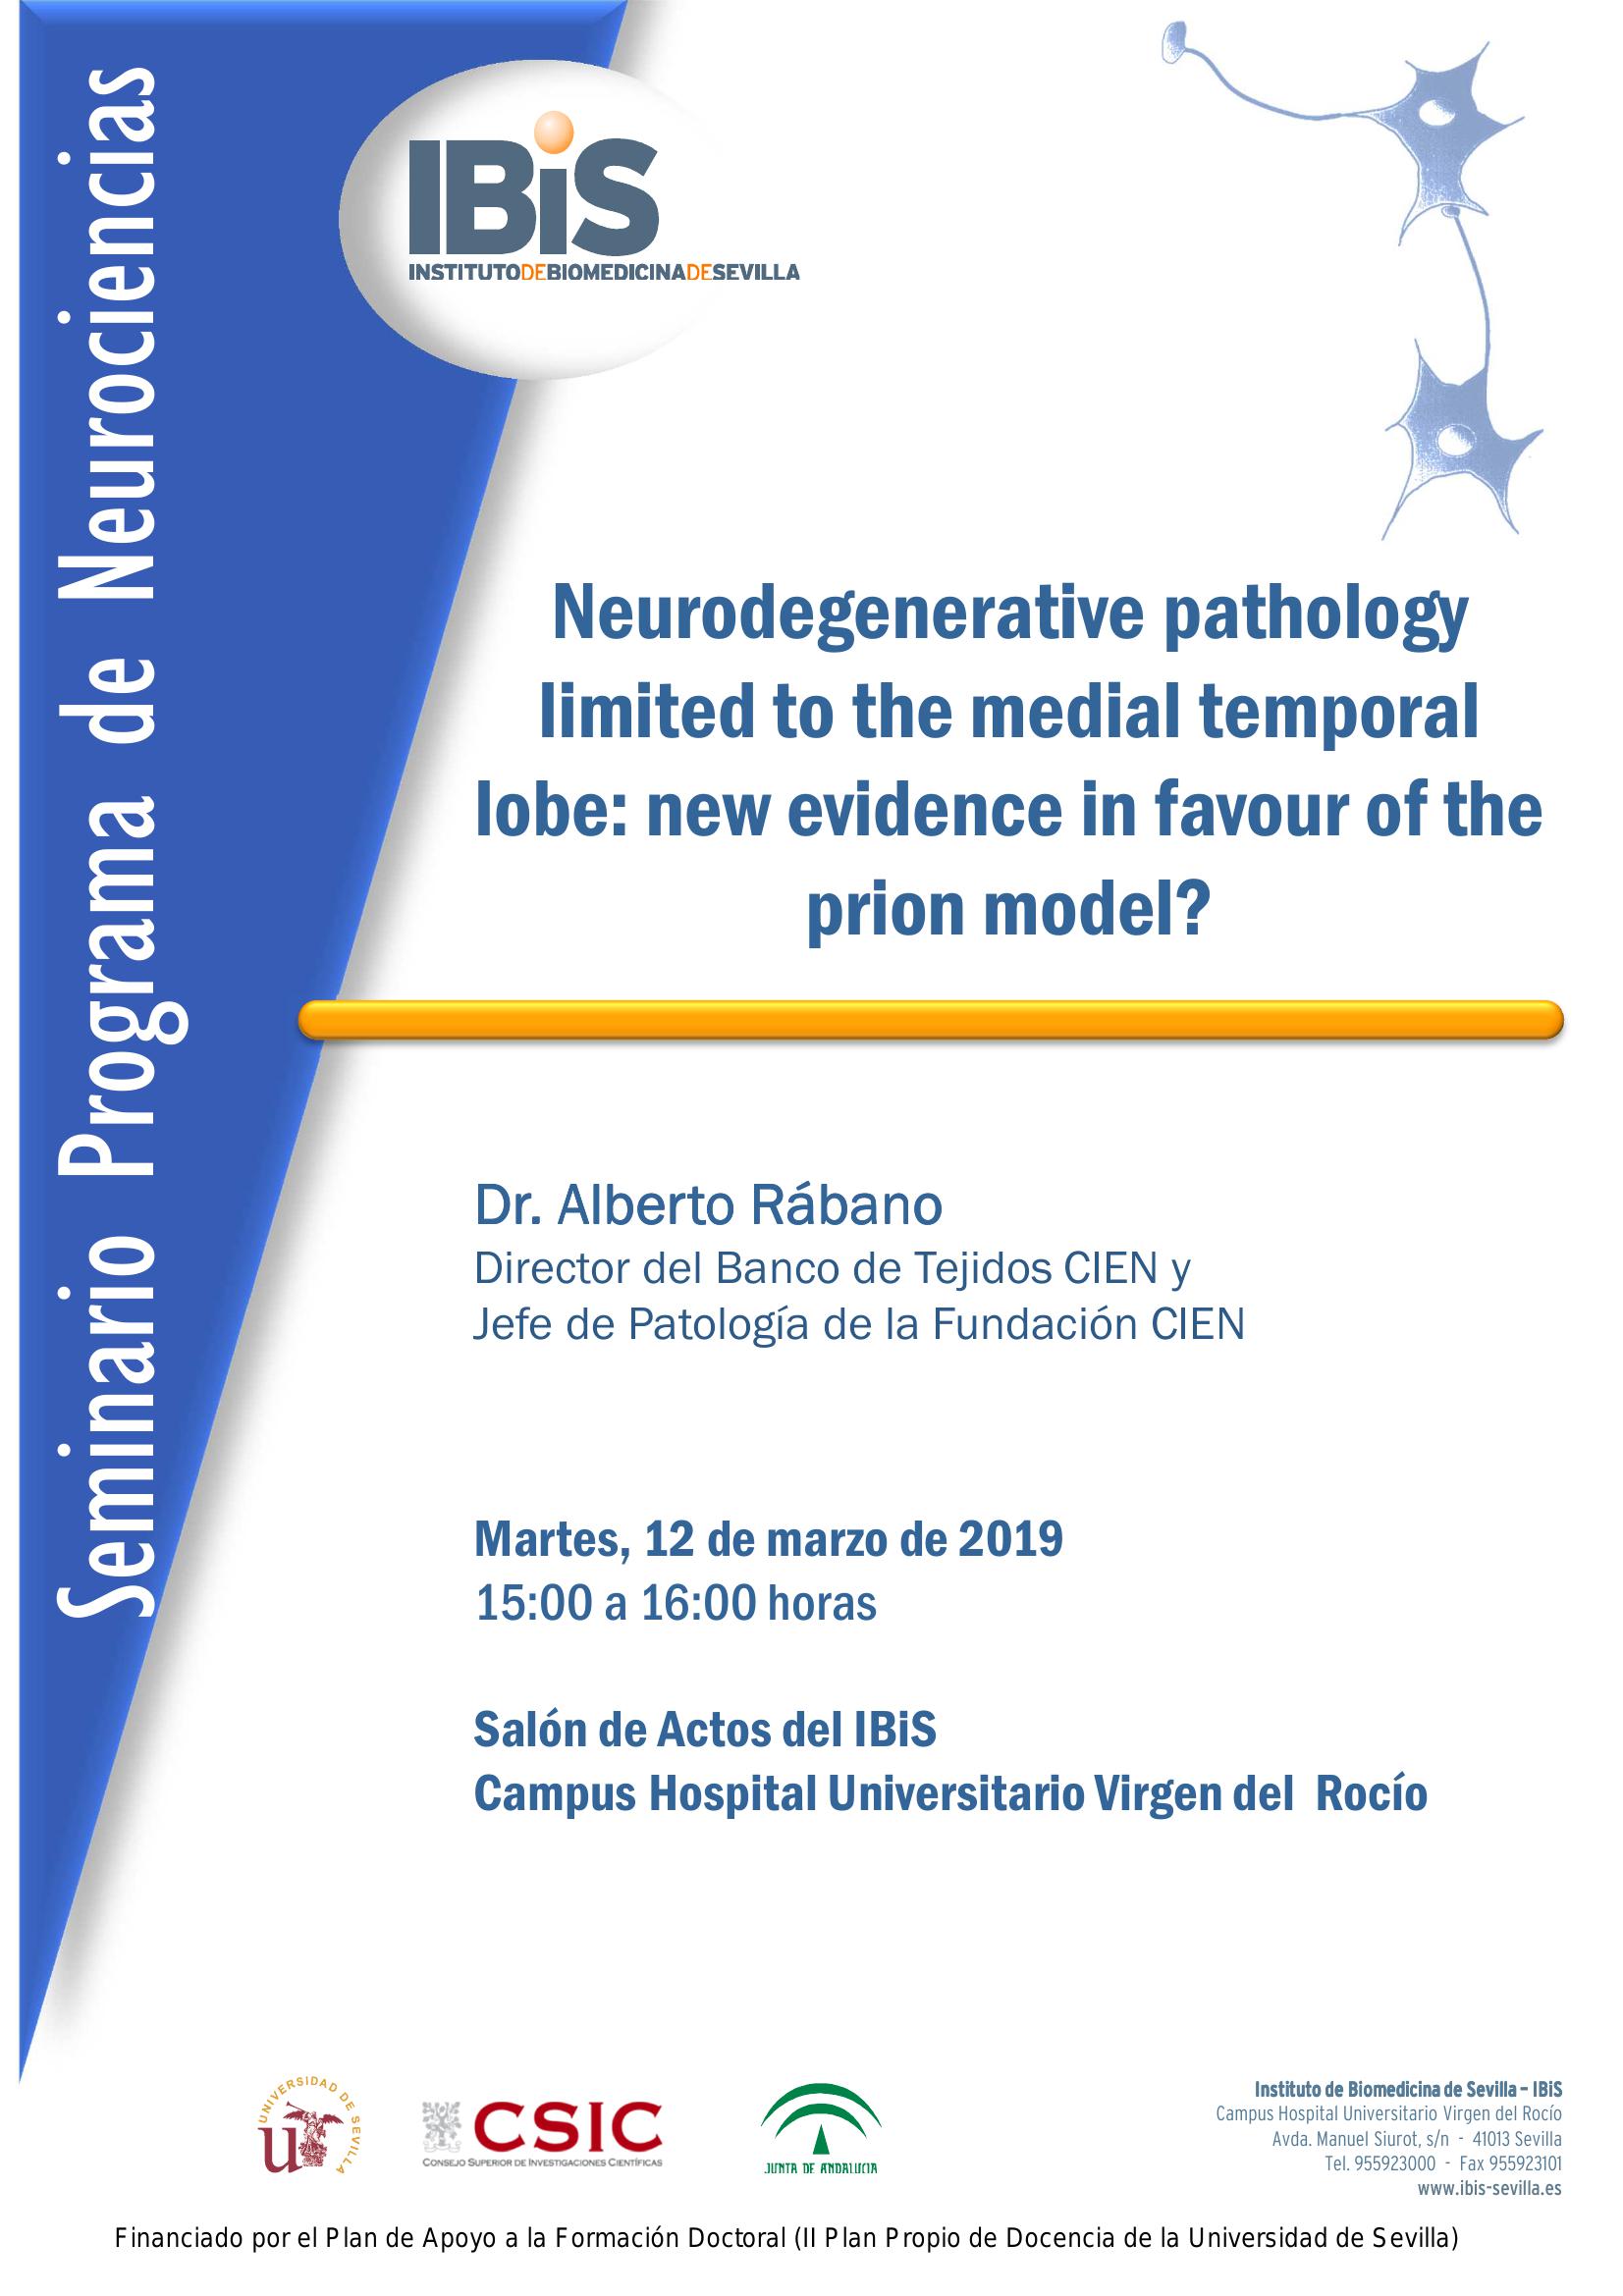 Poster: Neurodegenerative pathology limited to the medial temporal lobe: new evidence in favour of the prion model?